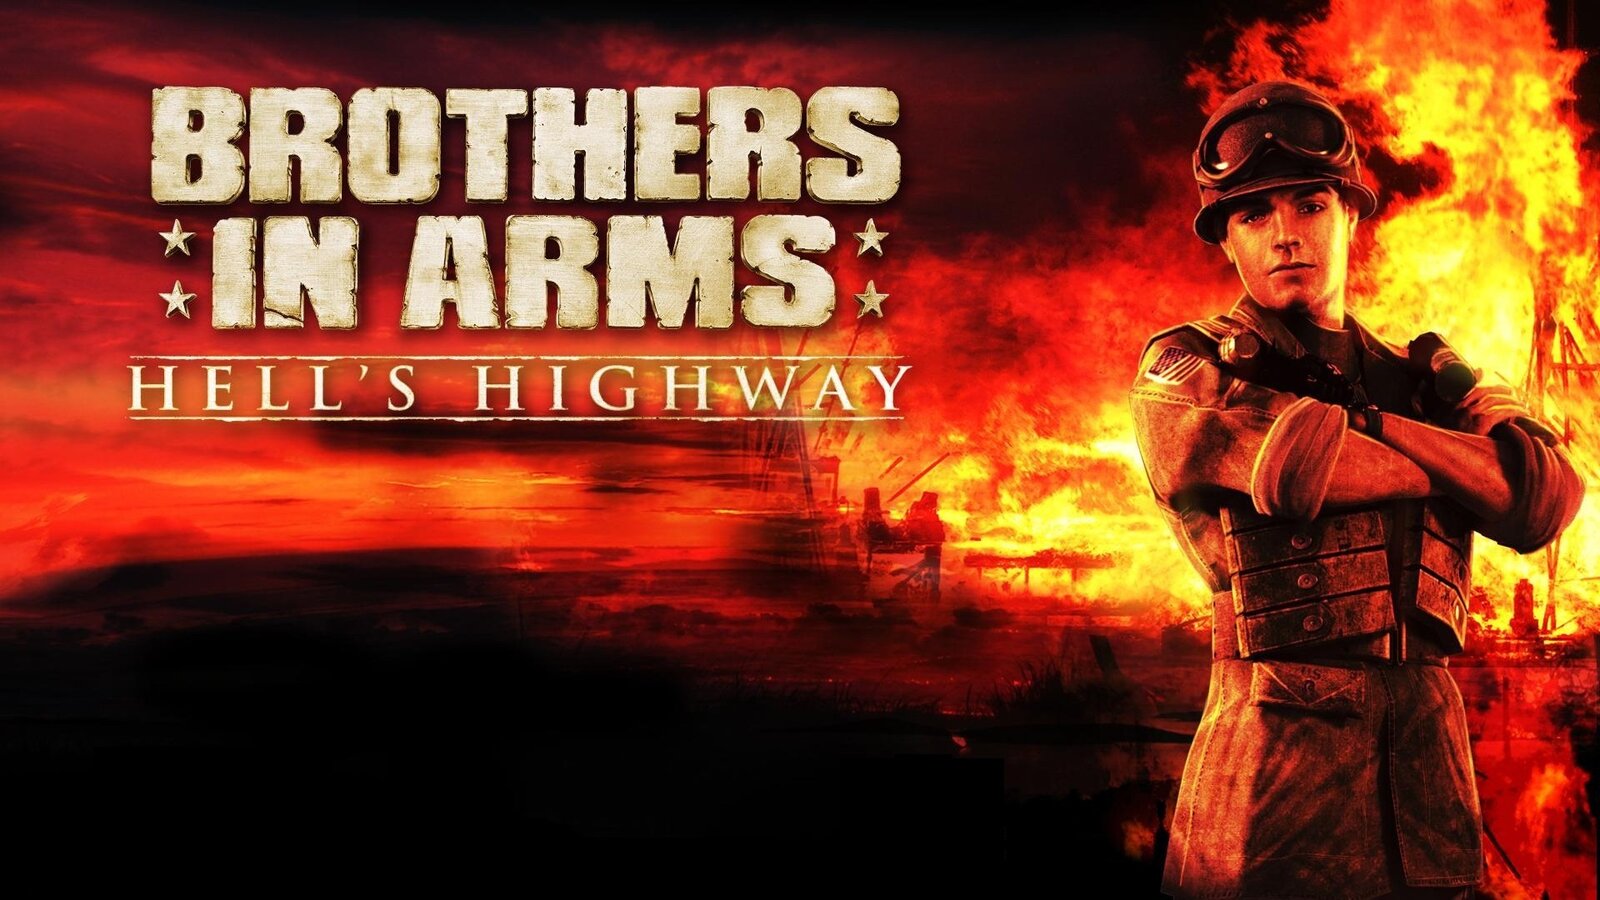 Brothers in Arms: Hells Highway